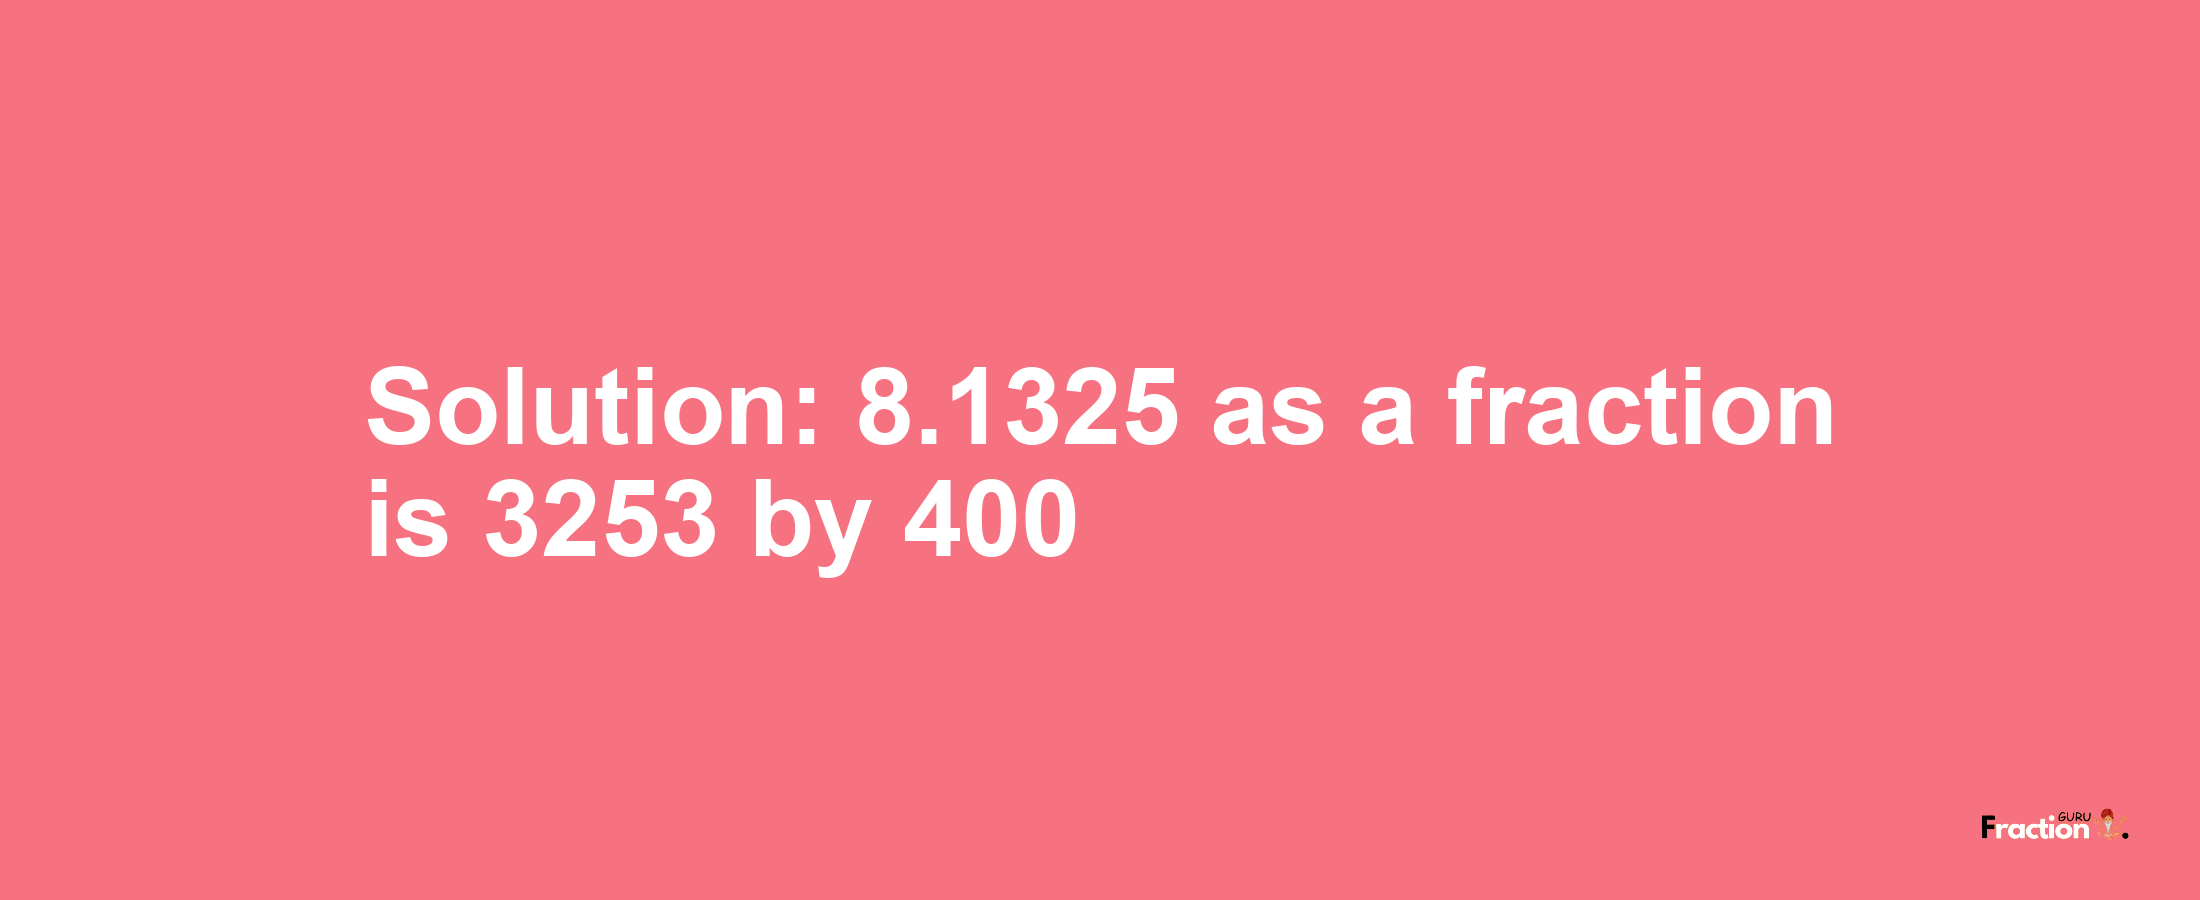 Solution:8.1325 as a fraction is 3253/400